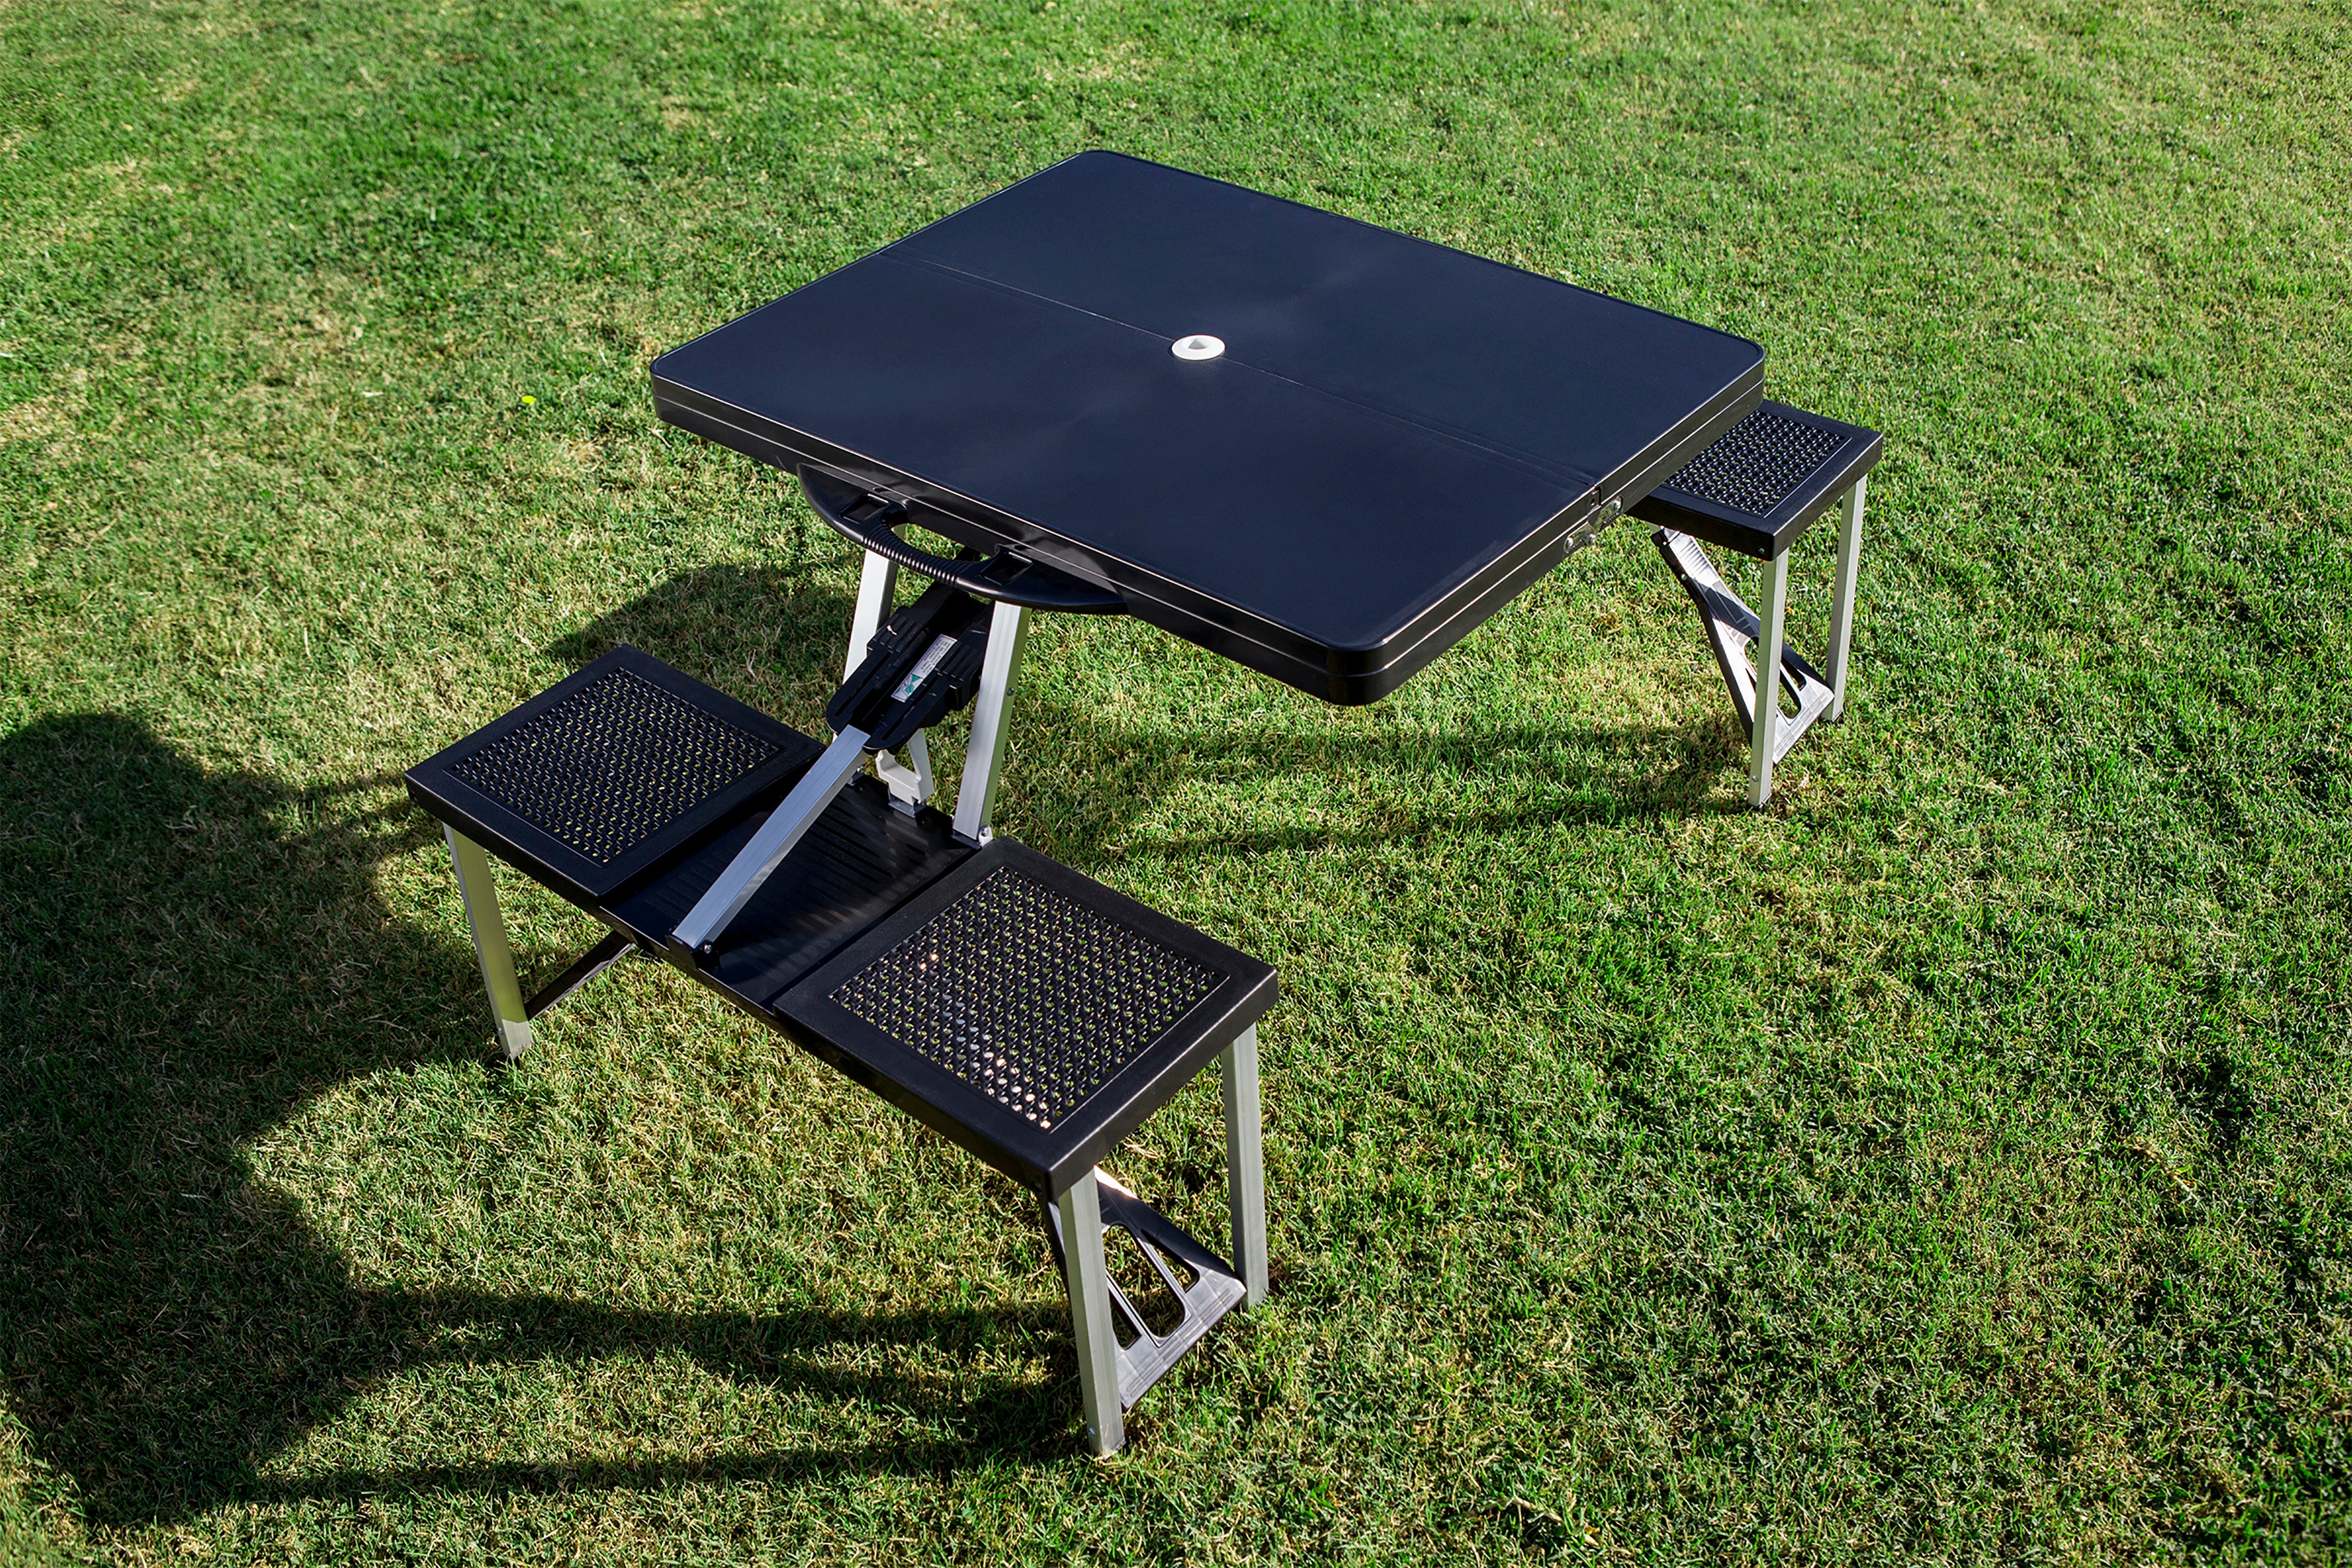 Pittsburgh Panthers Football Field - Picnic Table Portable Folding Table with Seats